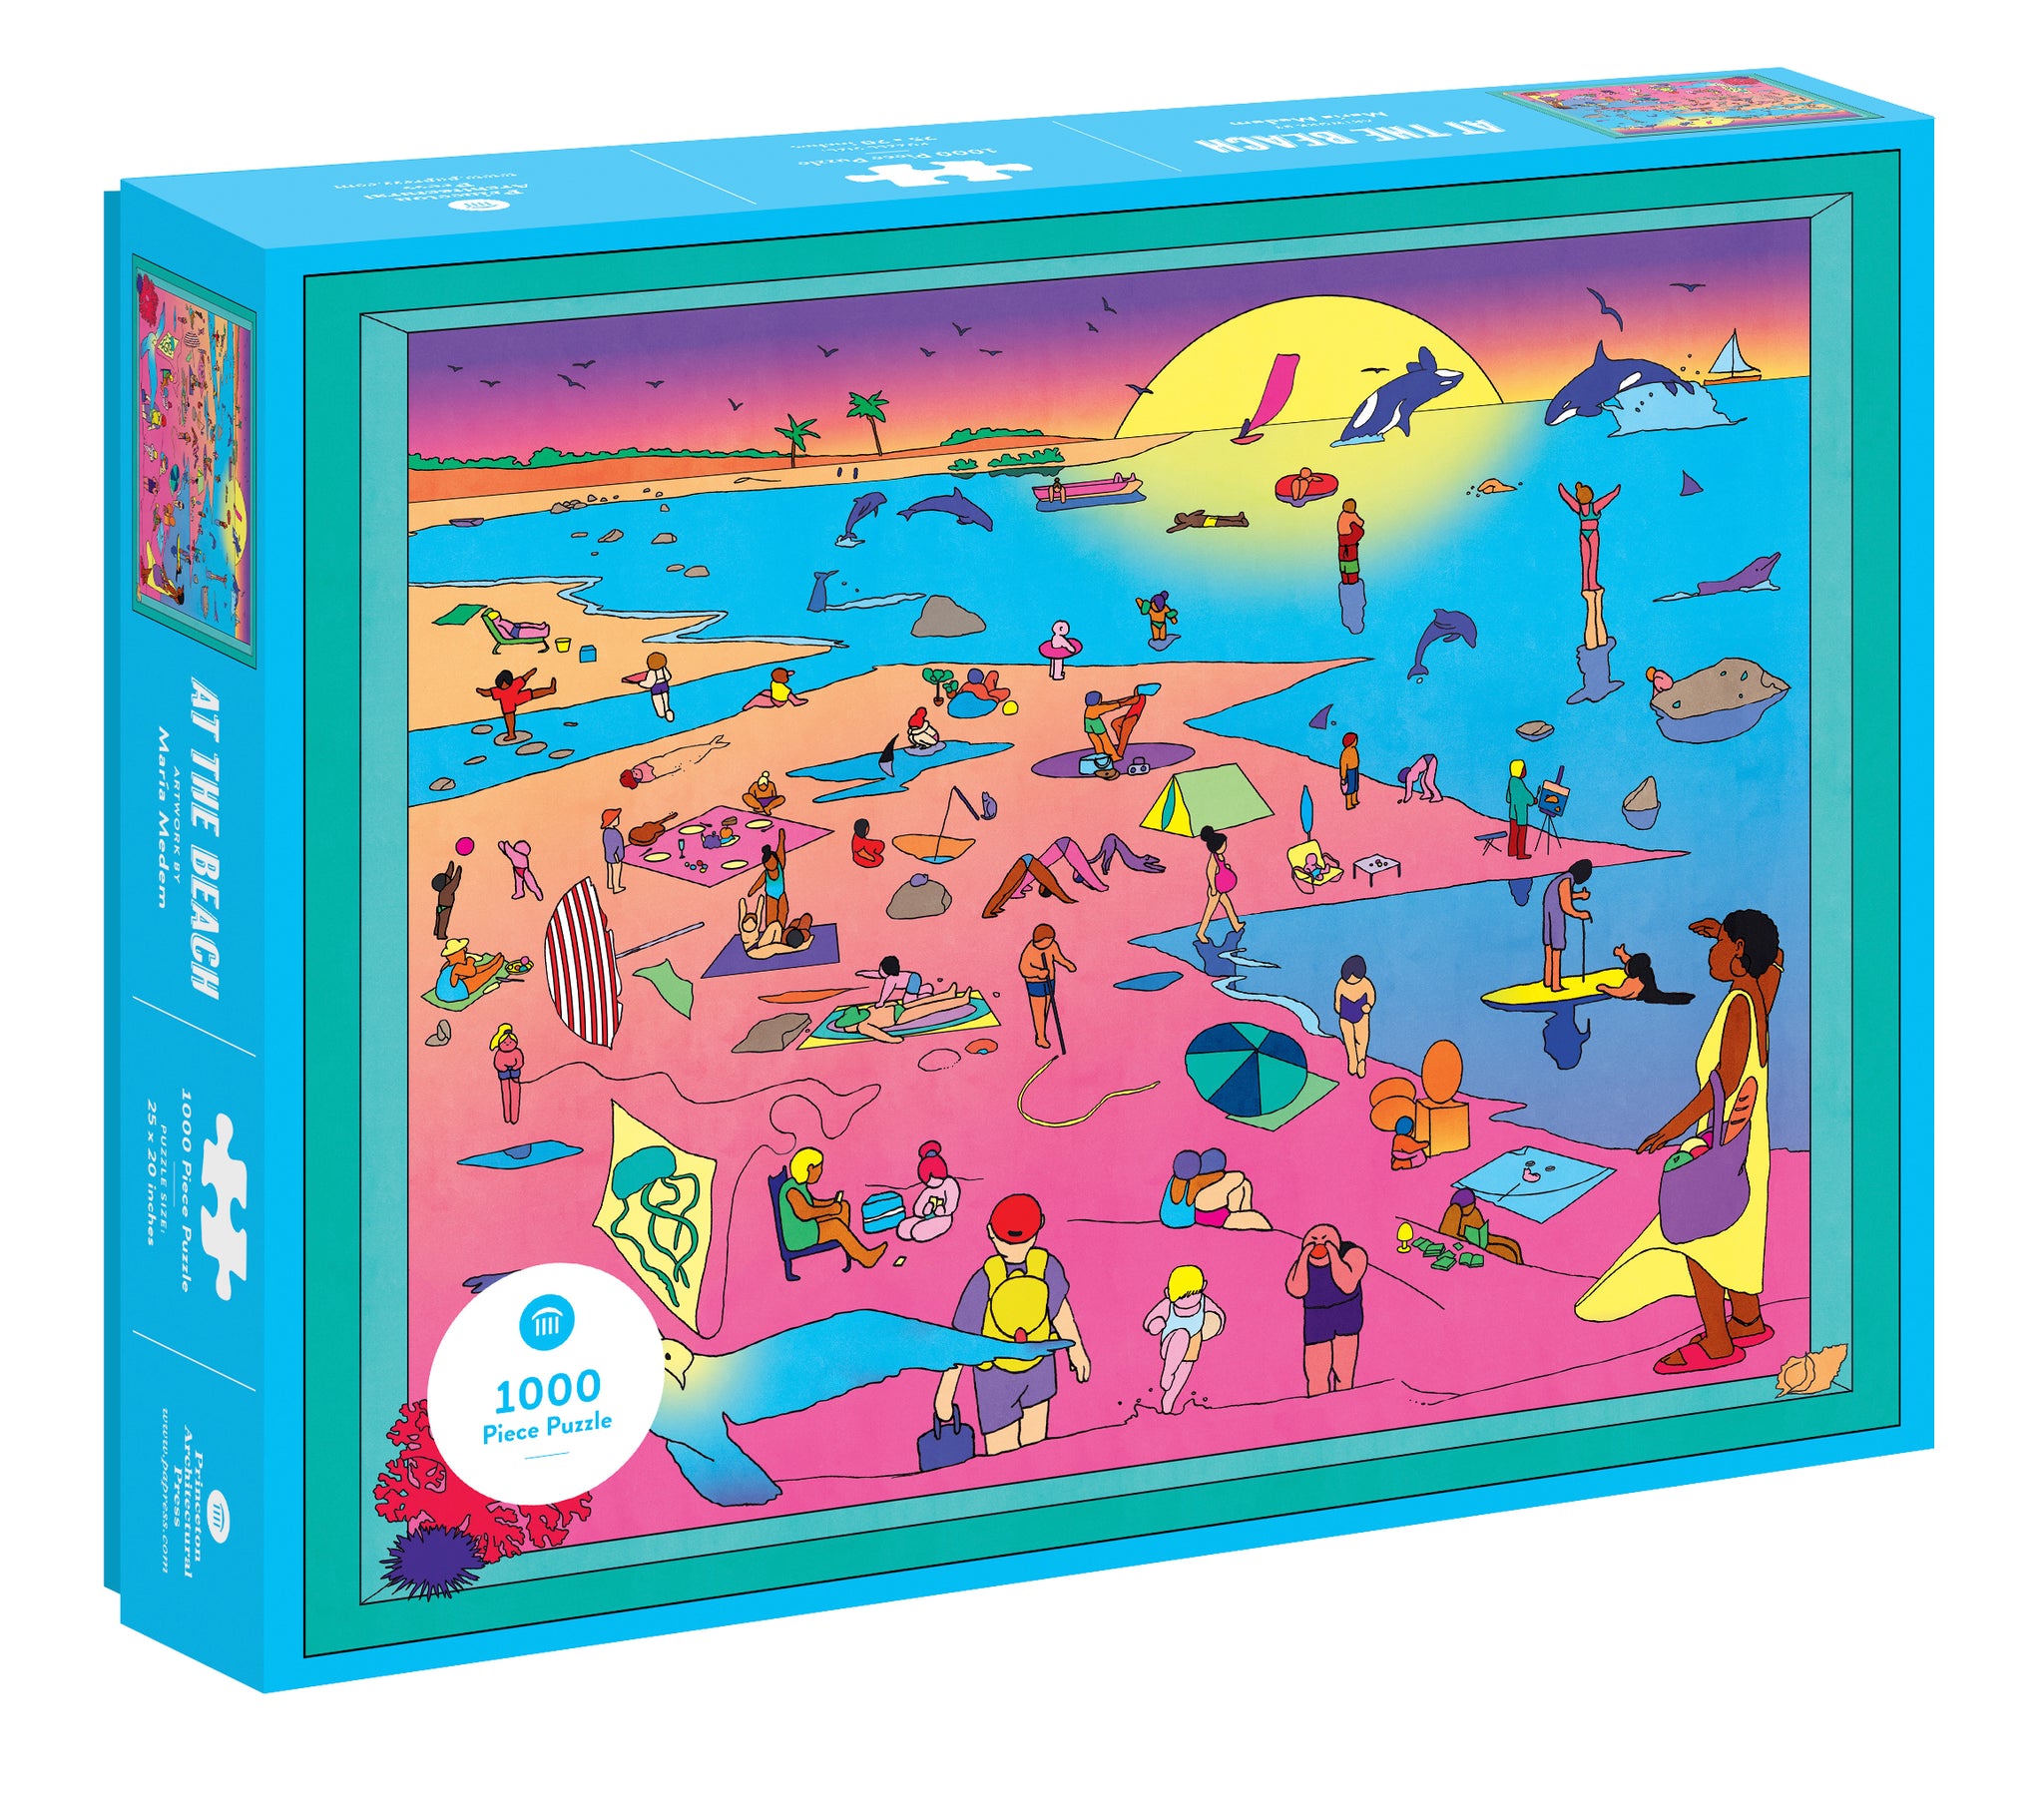 At the Beach: 1000 Piece Puzzle cover